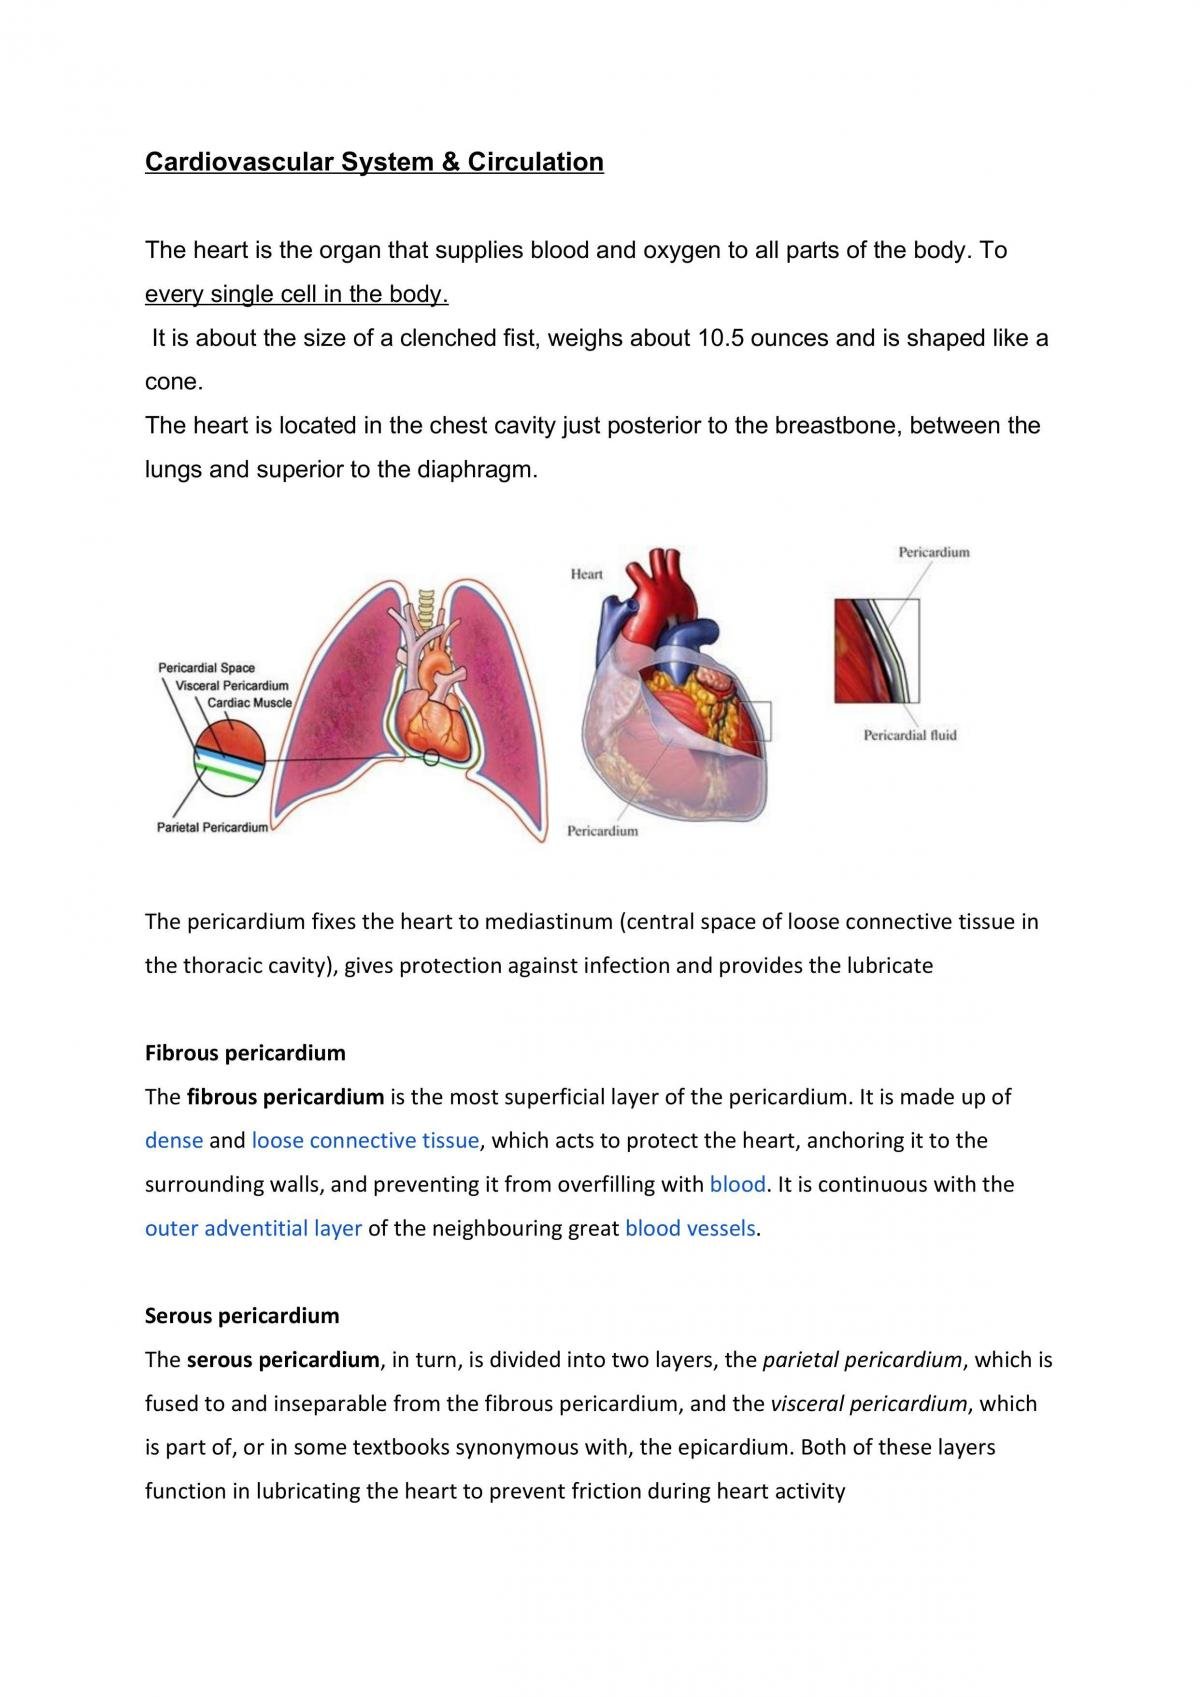 Cardiovascular System - Page 1